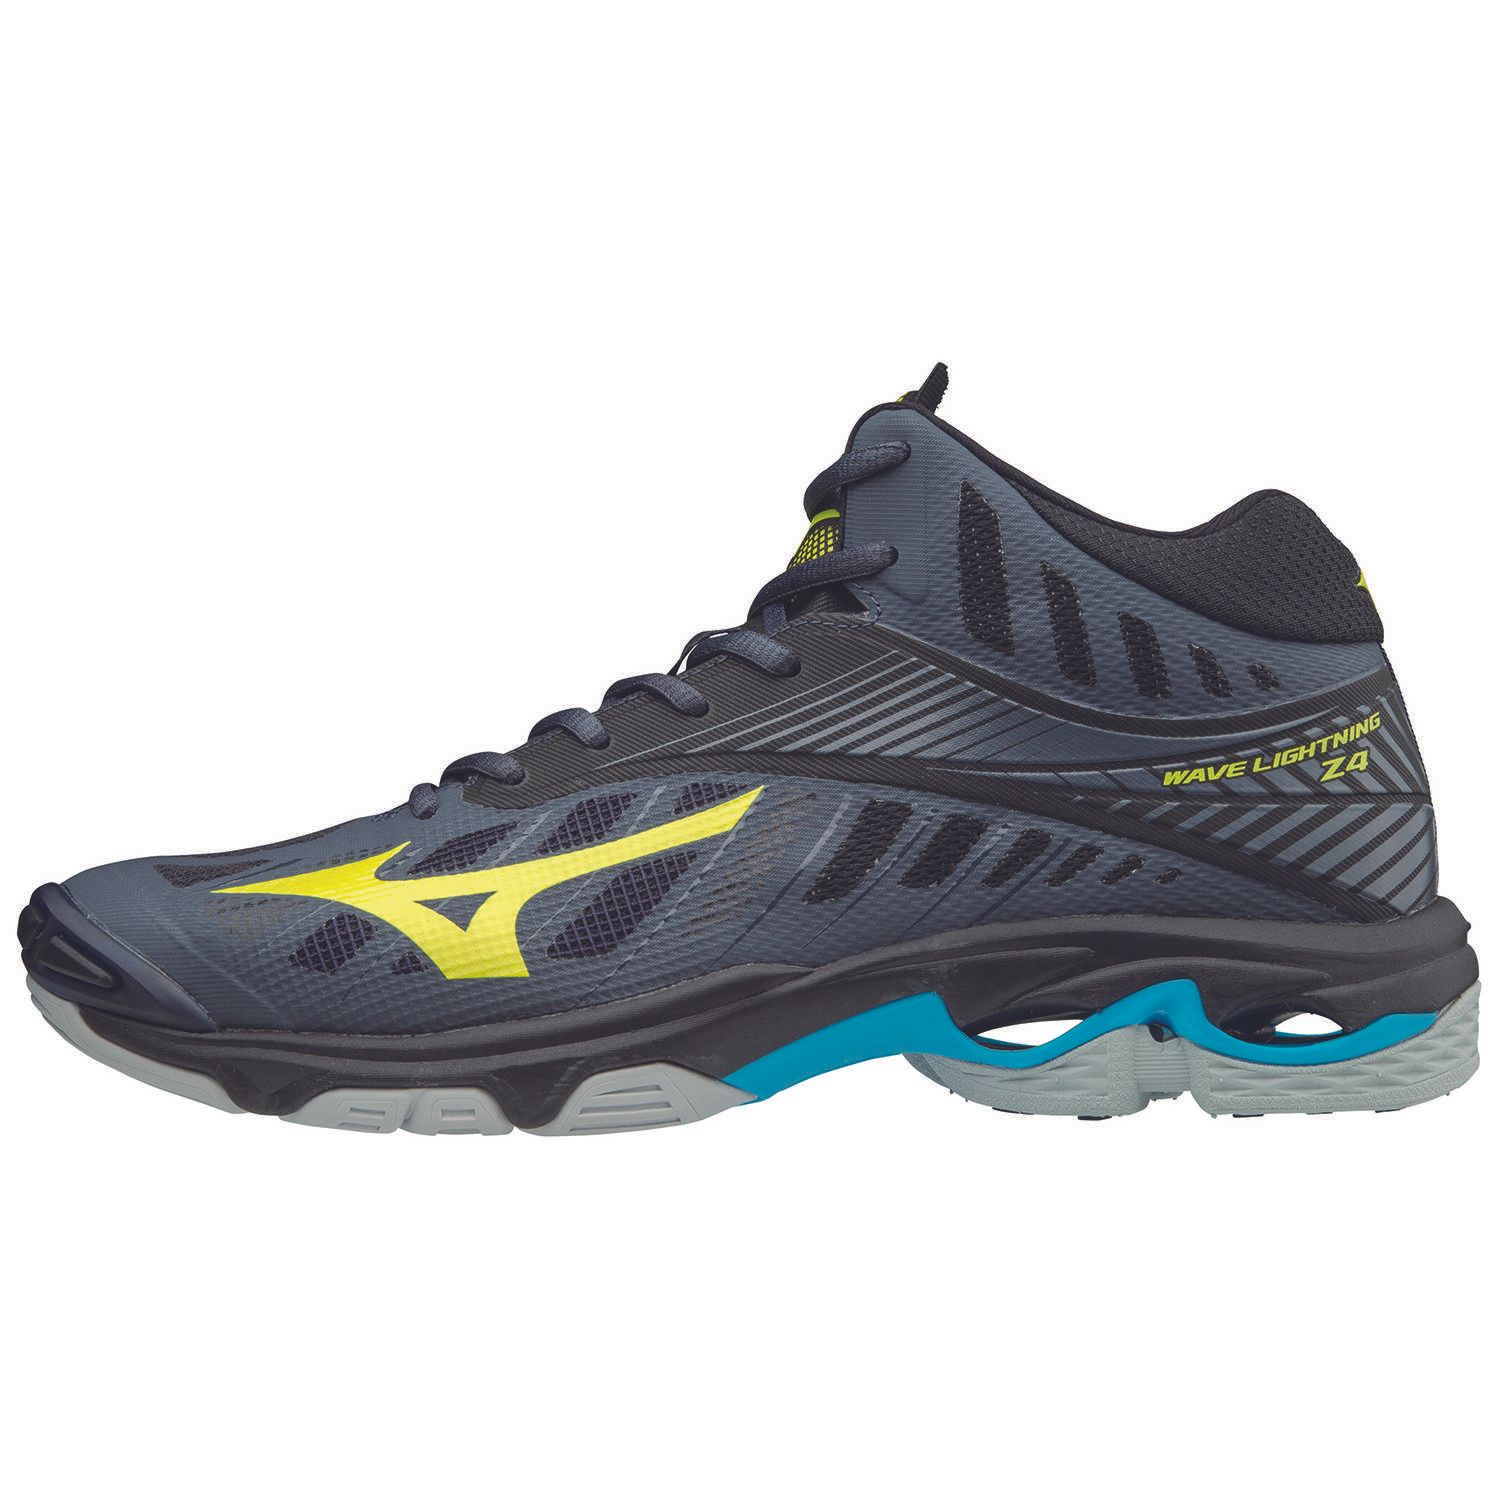 Chaussures Volley-Ball Wave Lightning Z4 Mid - OBlue/SYellow/Black